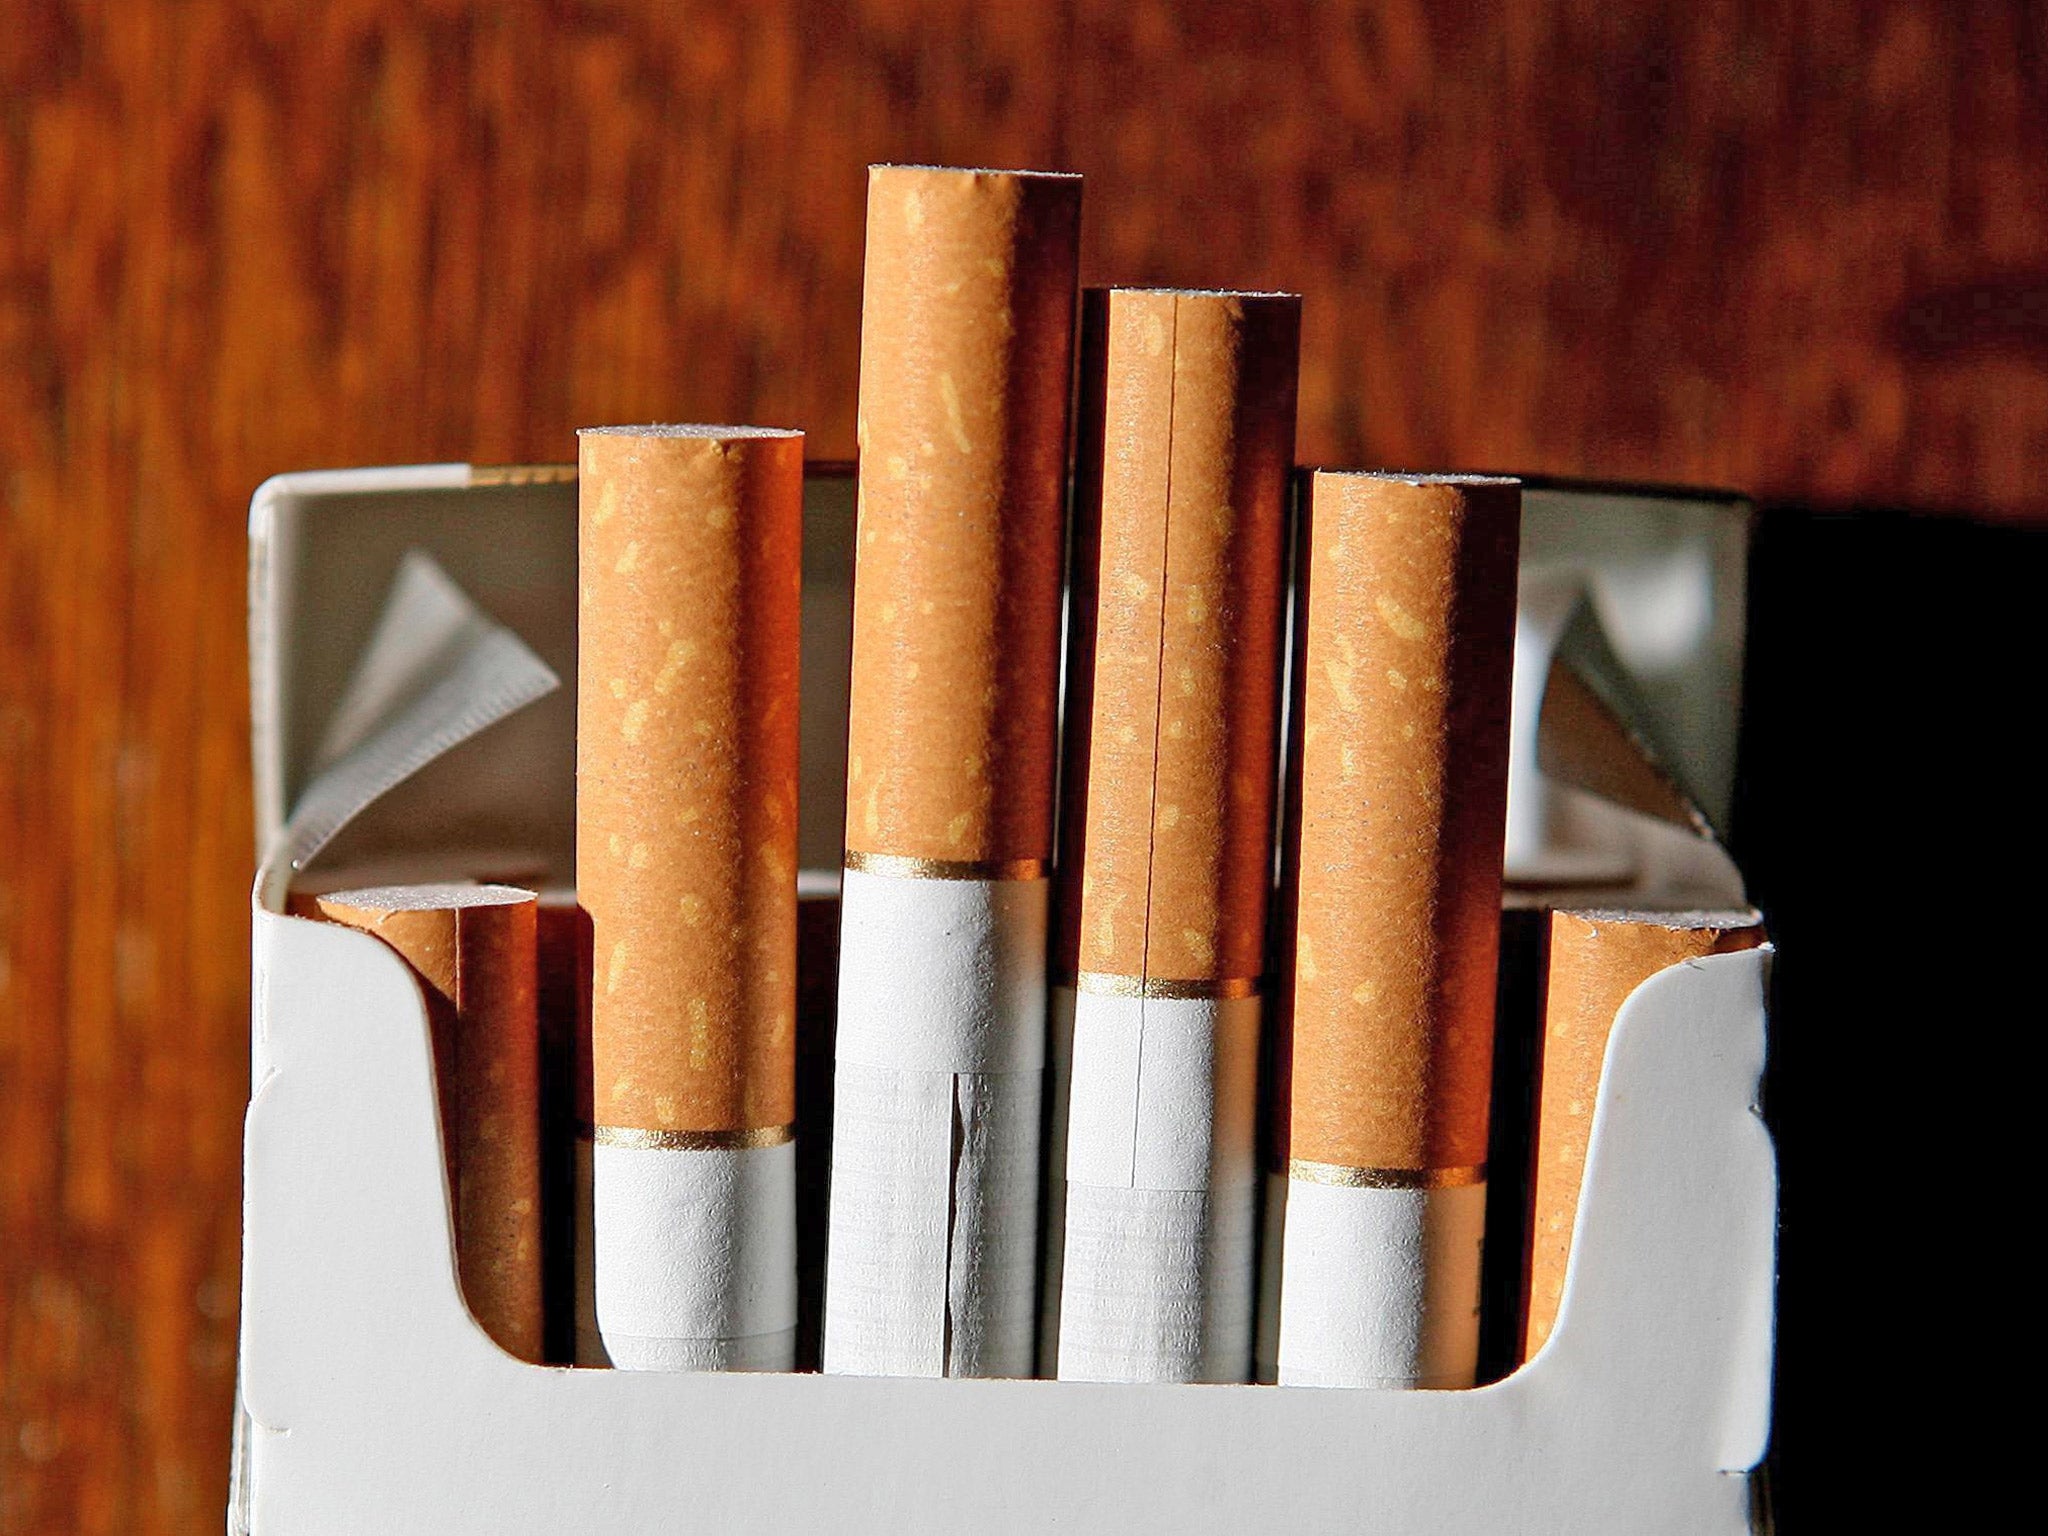 Public Health England has said that the evidence in favour of plain packaging is 'irrefutable'